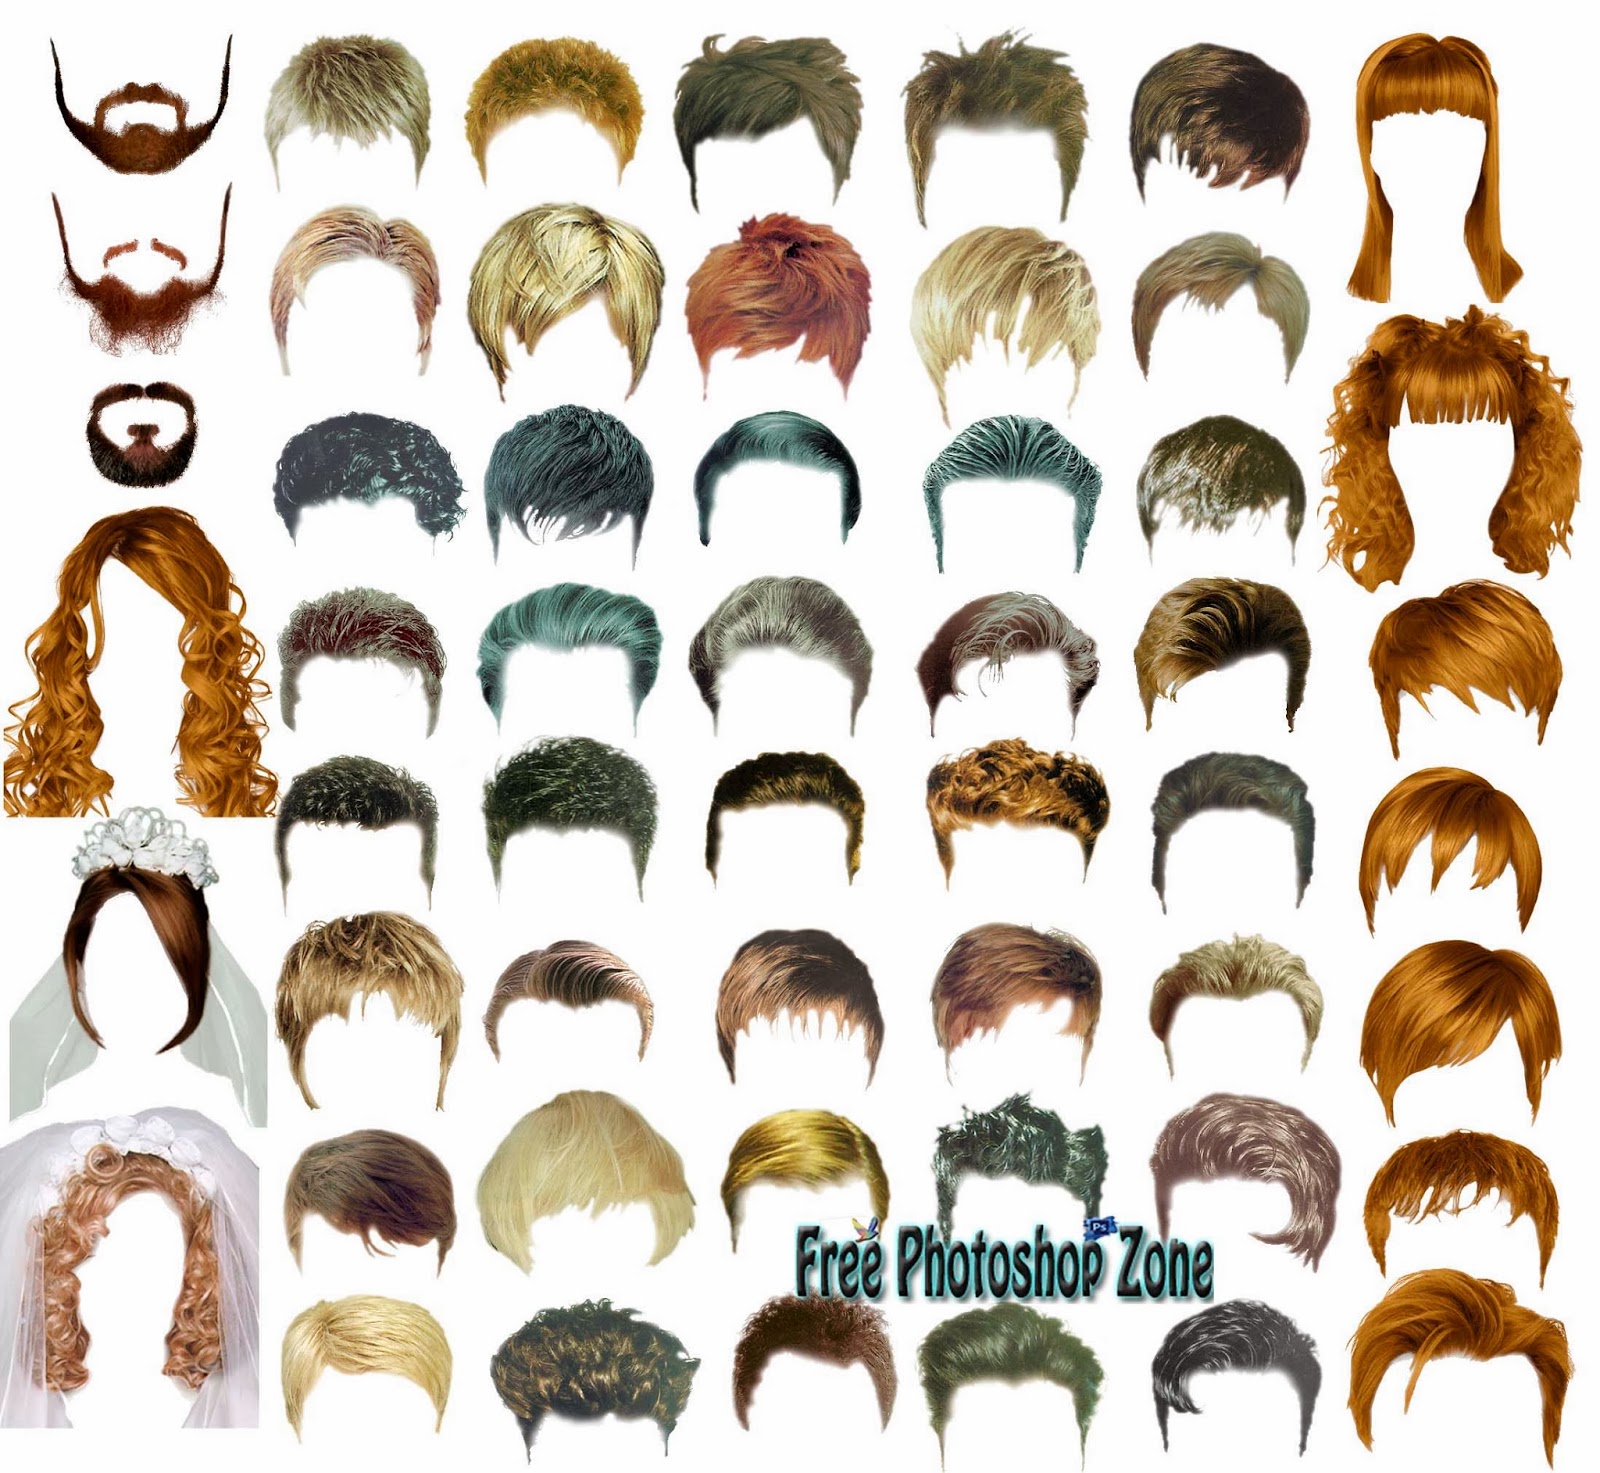  Hair  Styles  PSD Template  Free Photoshop Zone